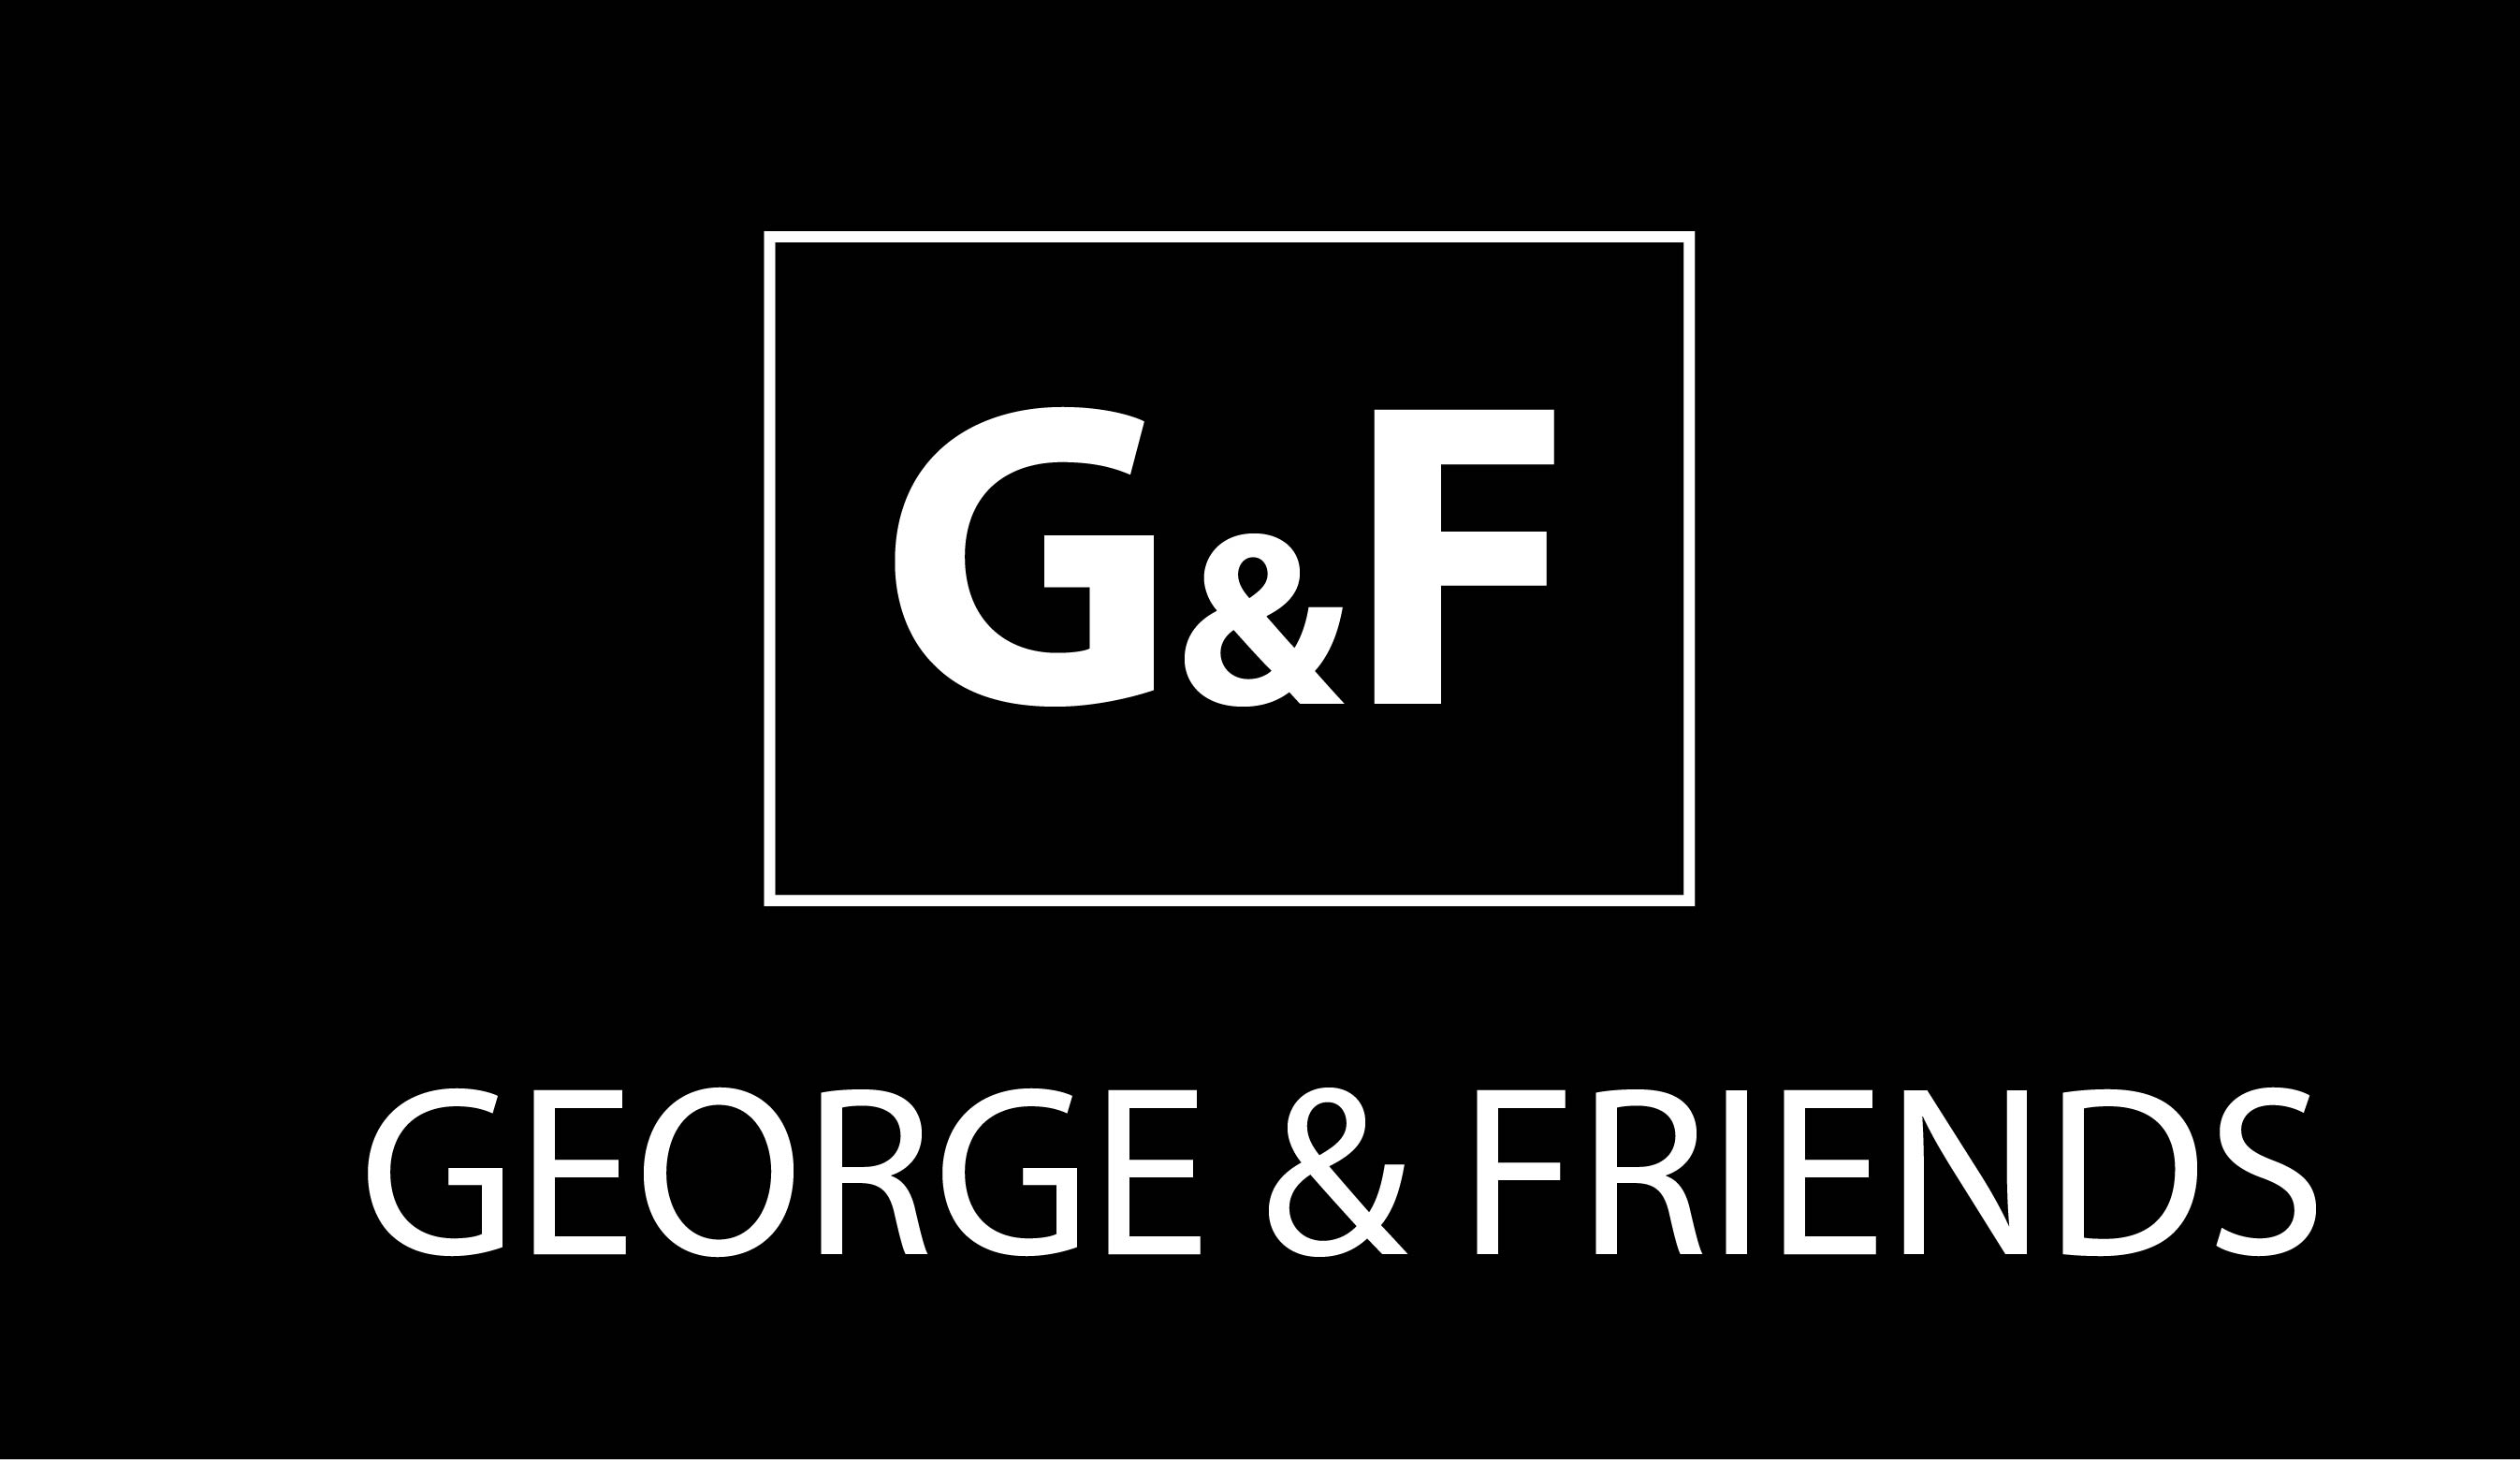 George and friends logo